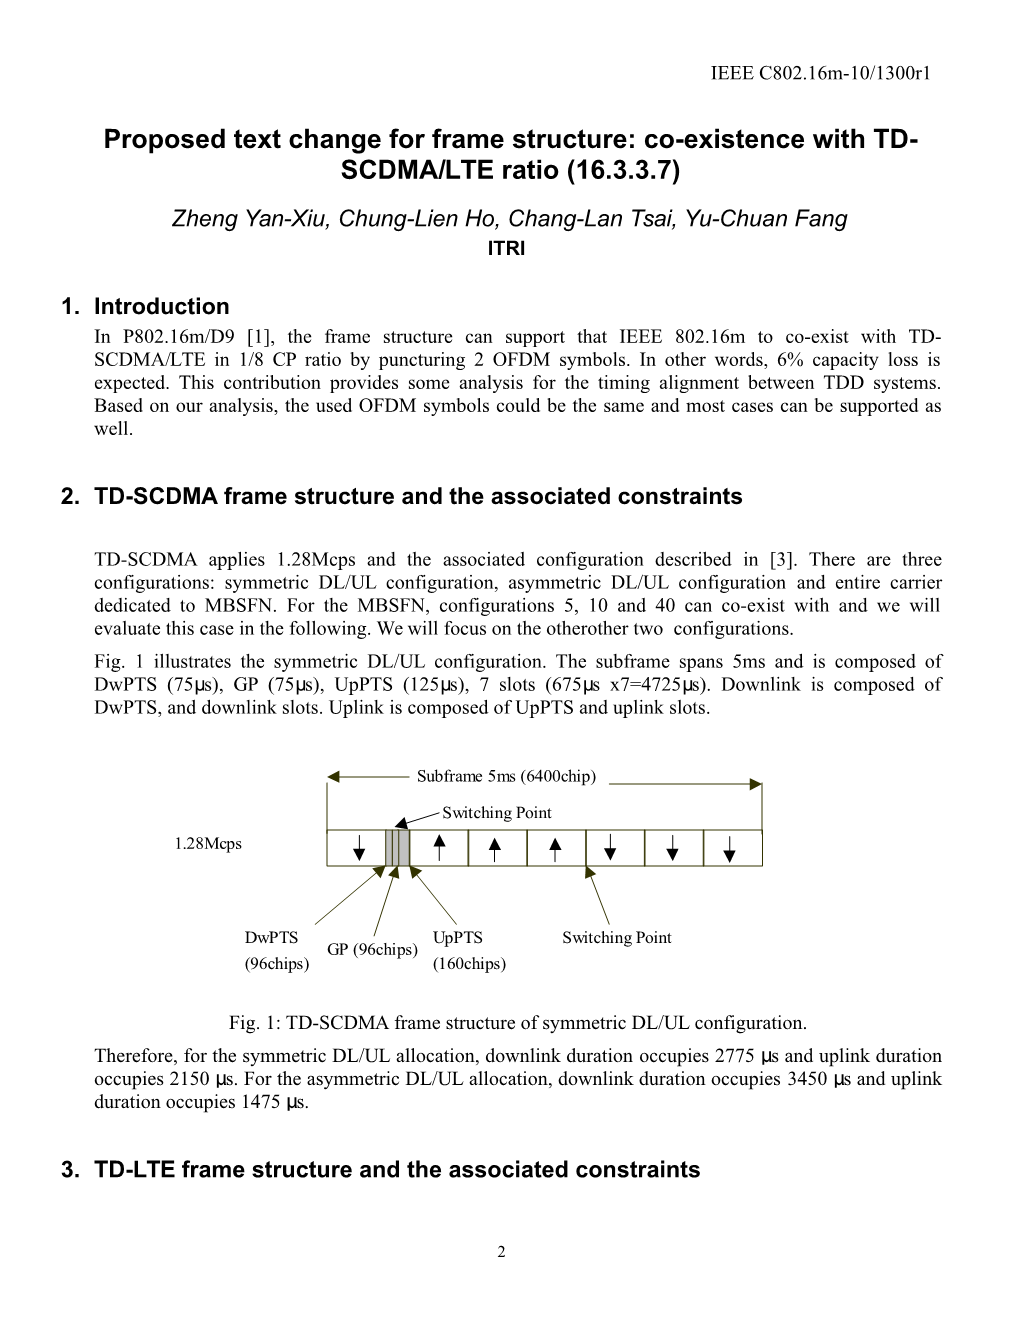 Proposed Text Change for Frame Structure: Co-Existence with TD-SCDMA/LTE Ratio (16.3.3.7)